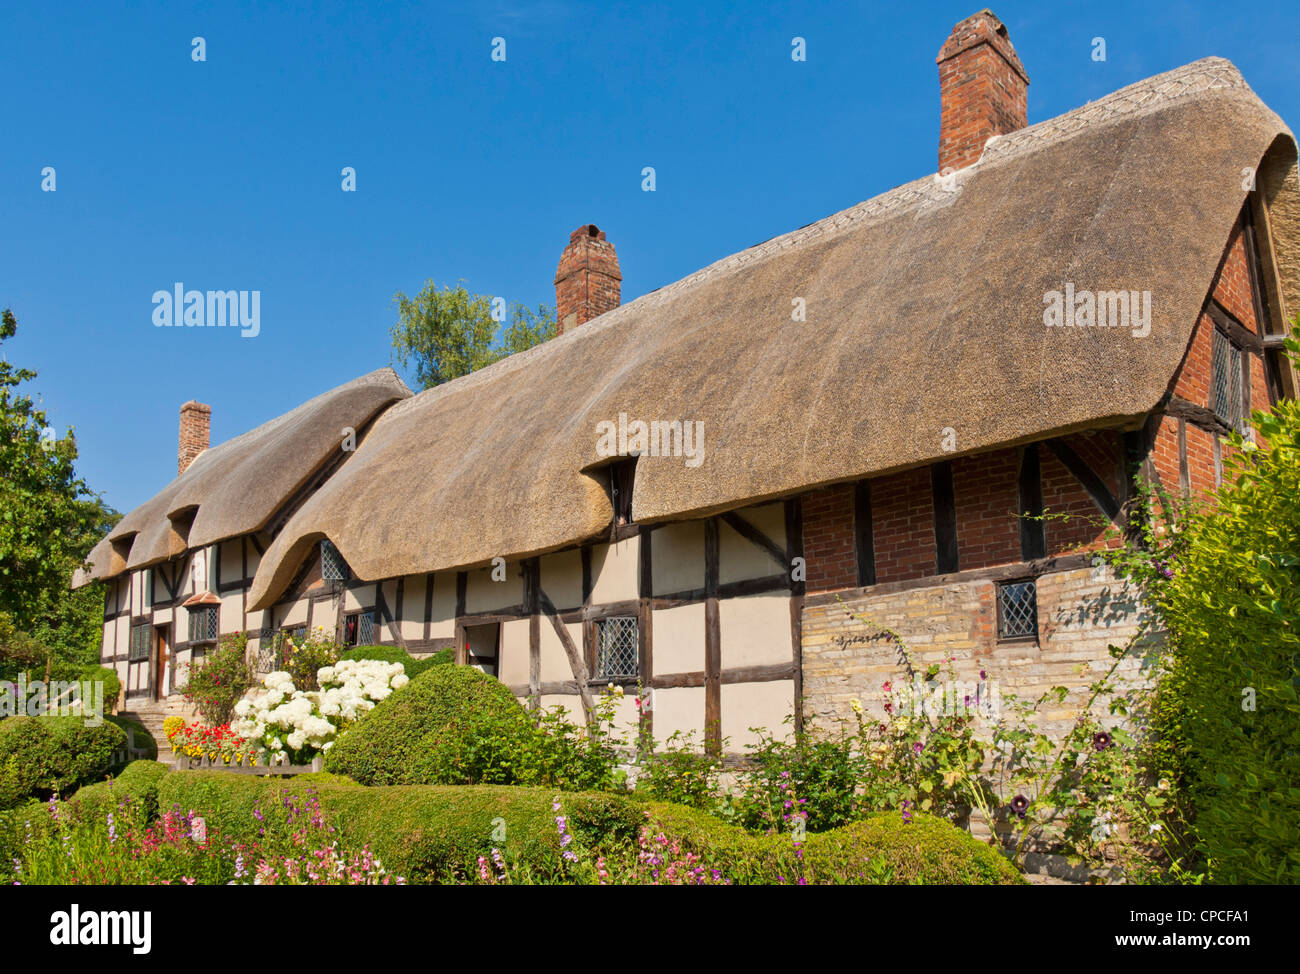 Anne Hathaway's cottage thatched Shottery vicino a Stratford upon Avon Warwickshire England Regno Unito GB EU Europe Foto Stock